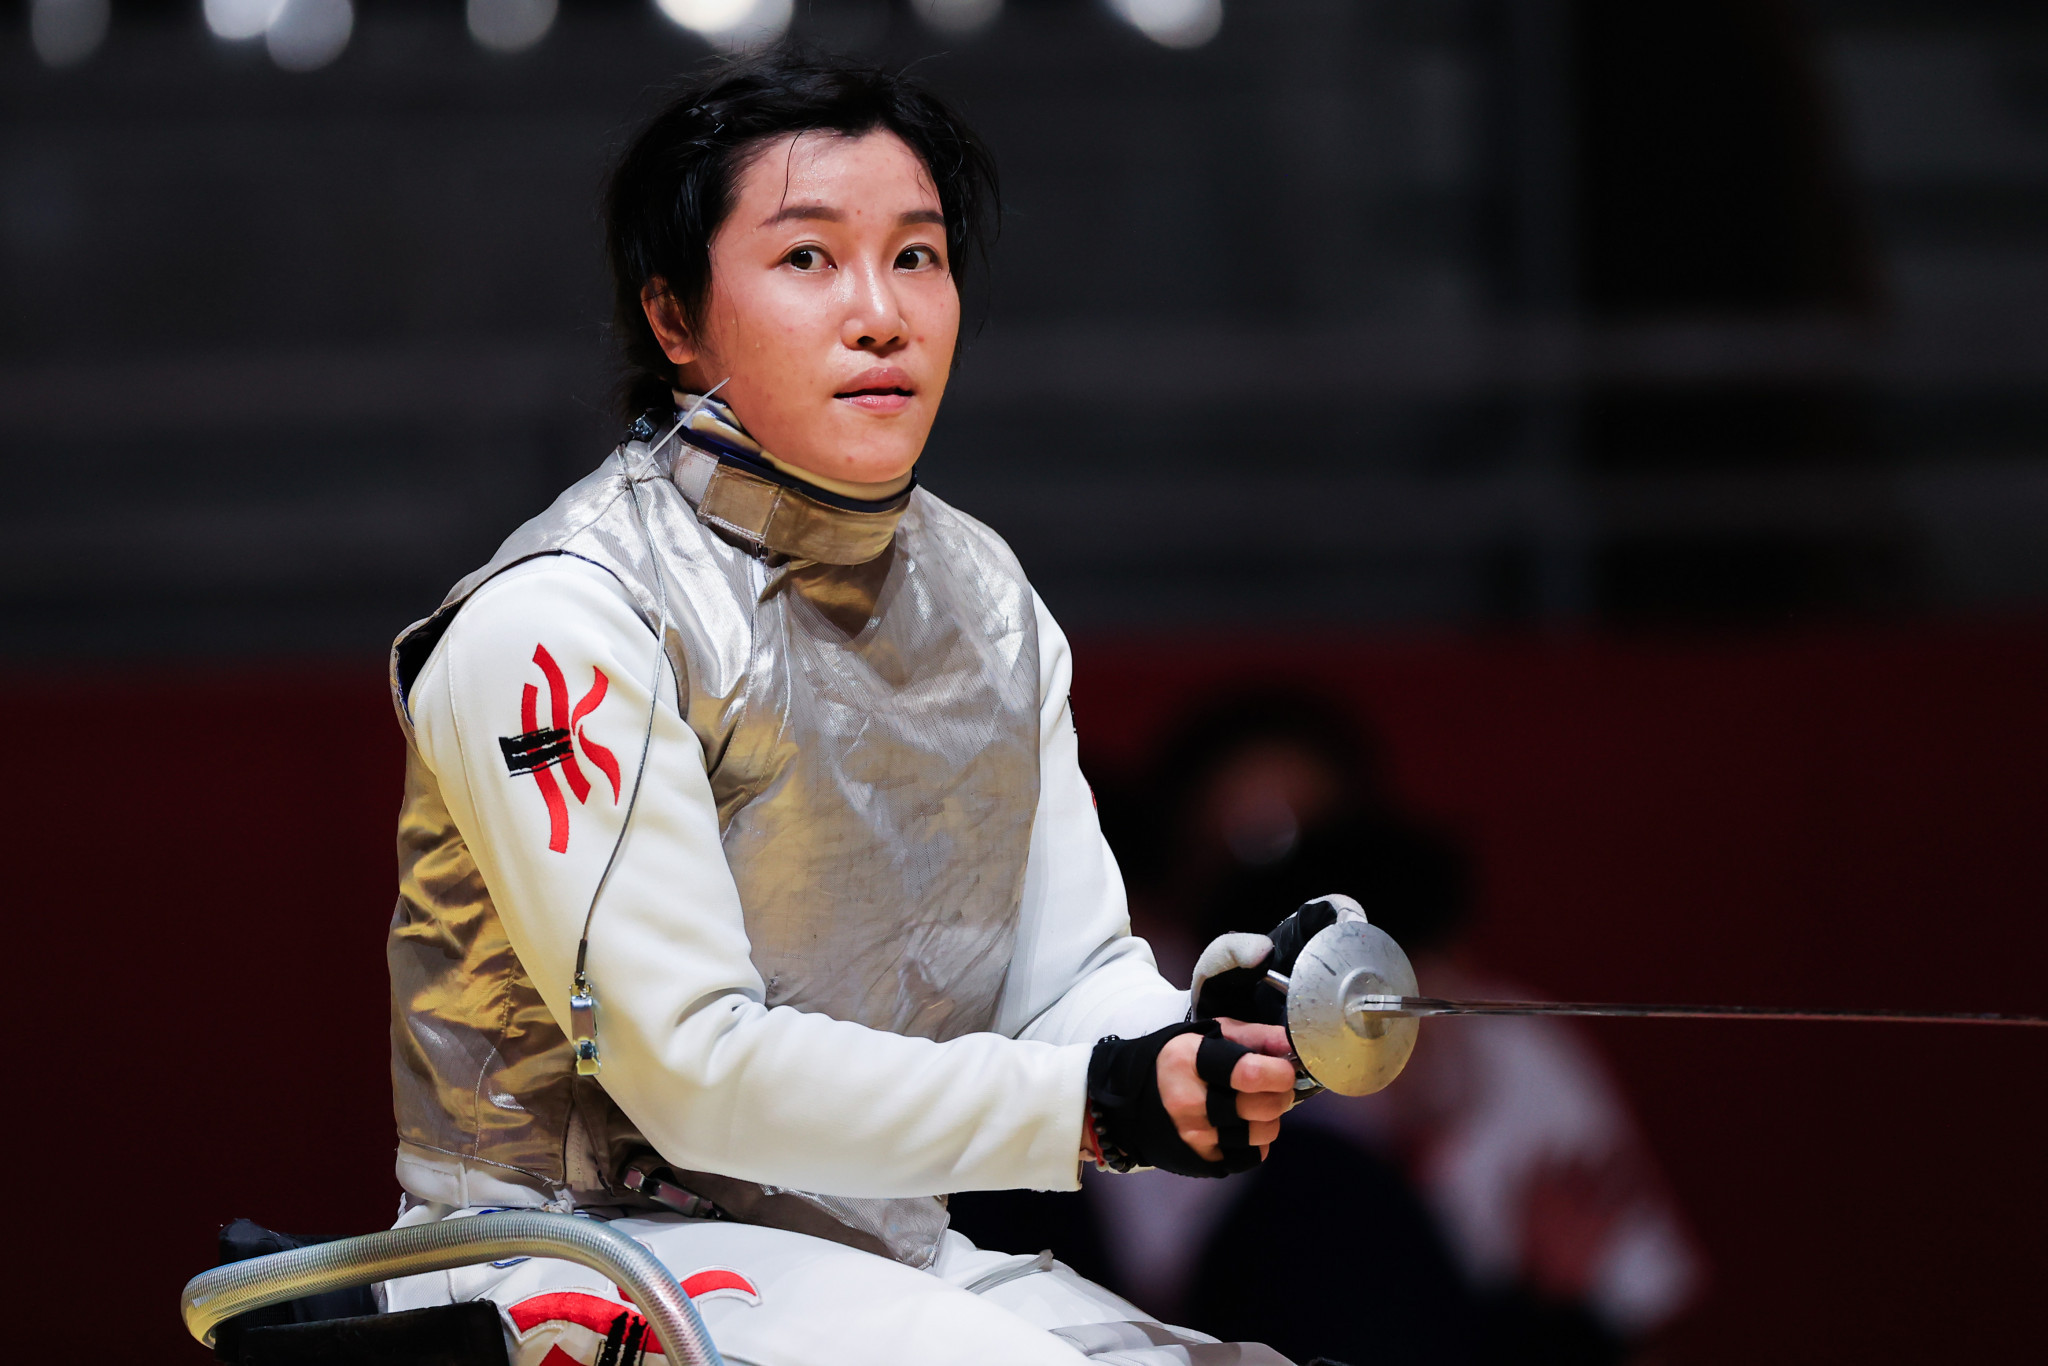 Hong Kong's seven-time Paralympic gold medallist Yu Chui Yee triumphed in the women's foil A competition in Chon Buri ©Getty Images